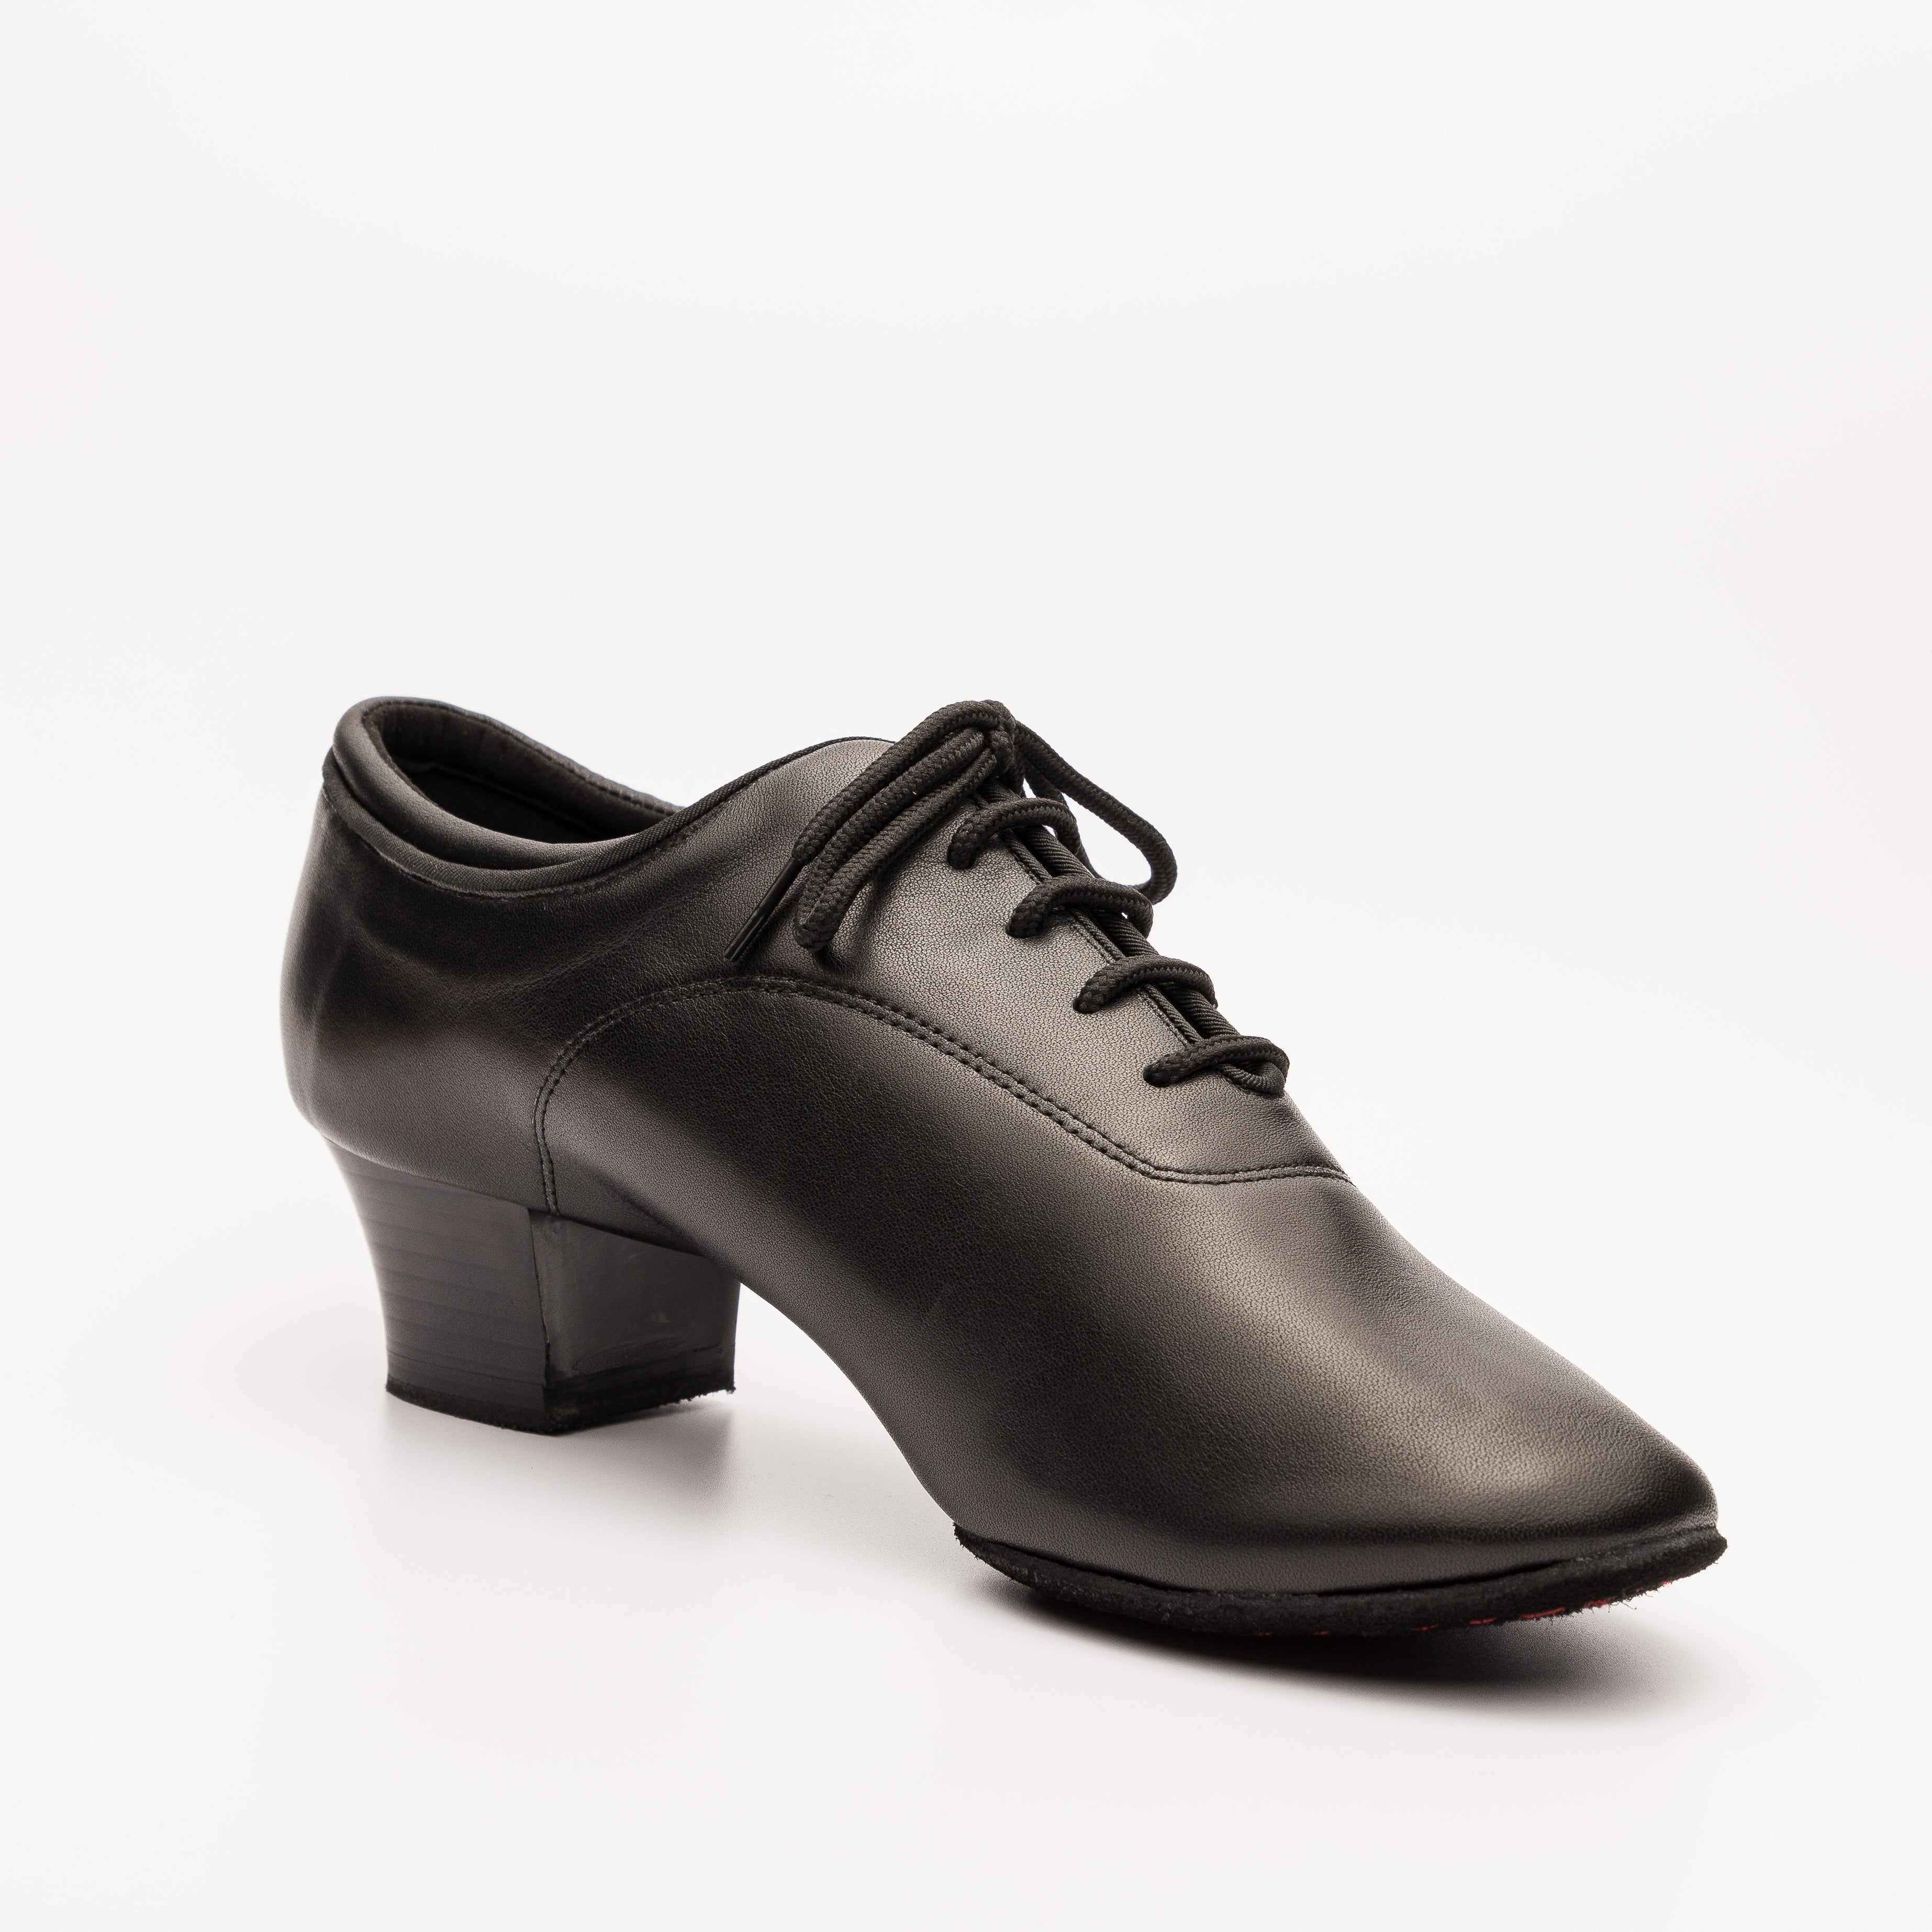 PRO Edition Leather Men's Shoes - High heel